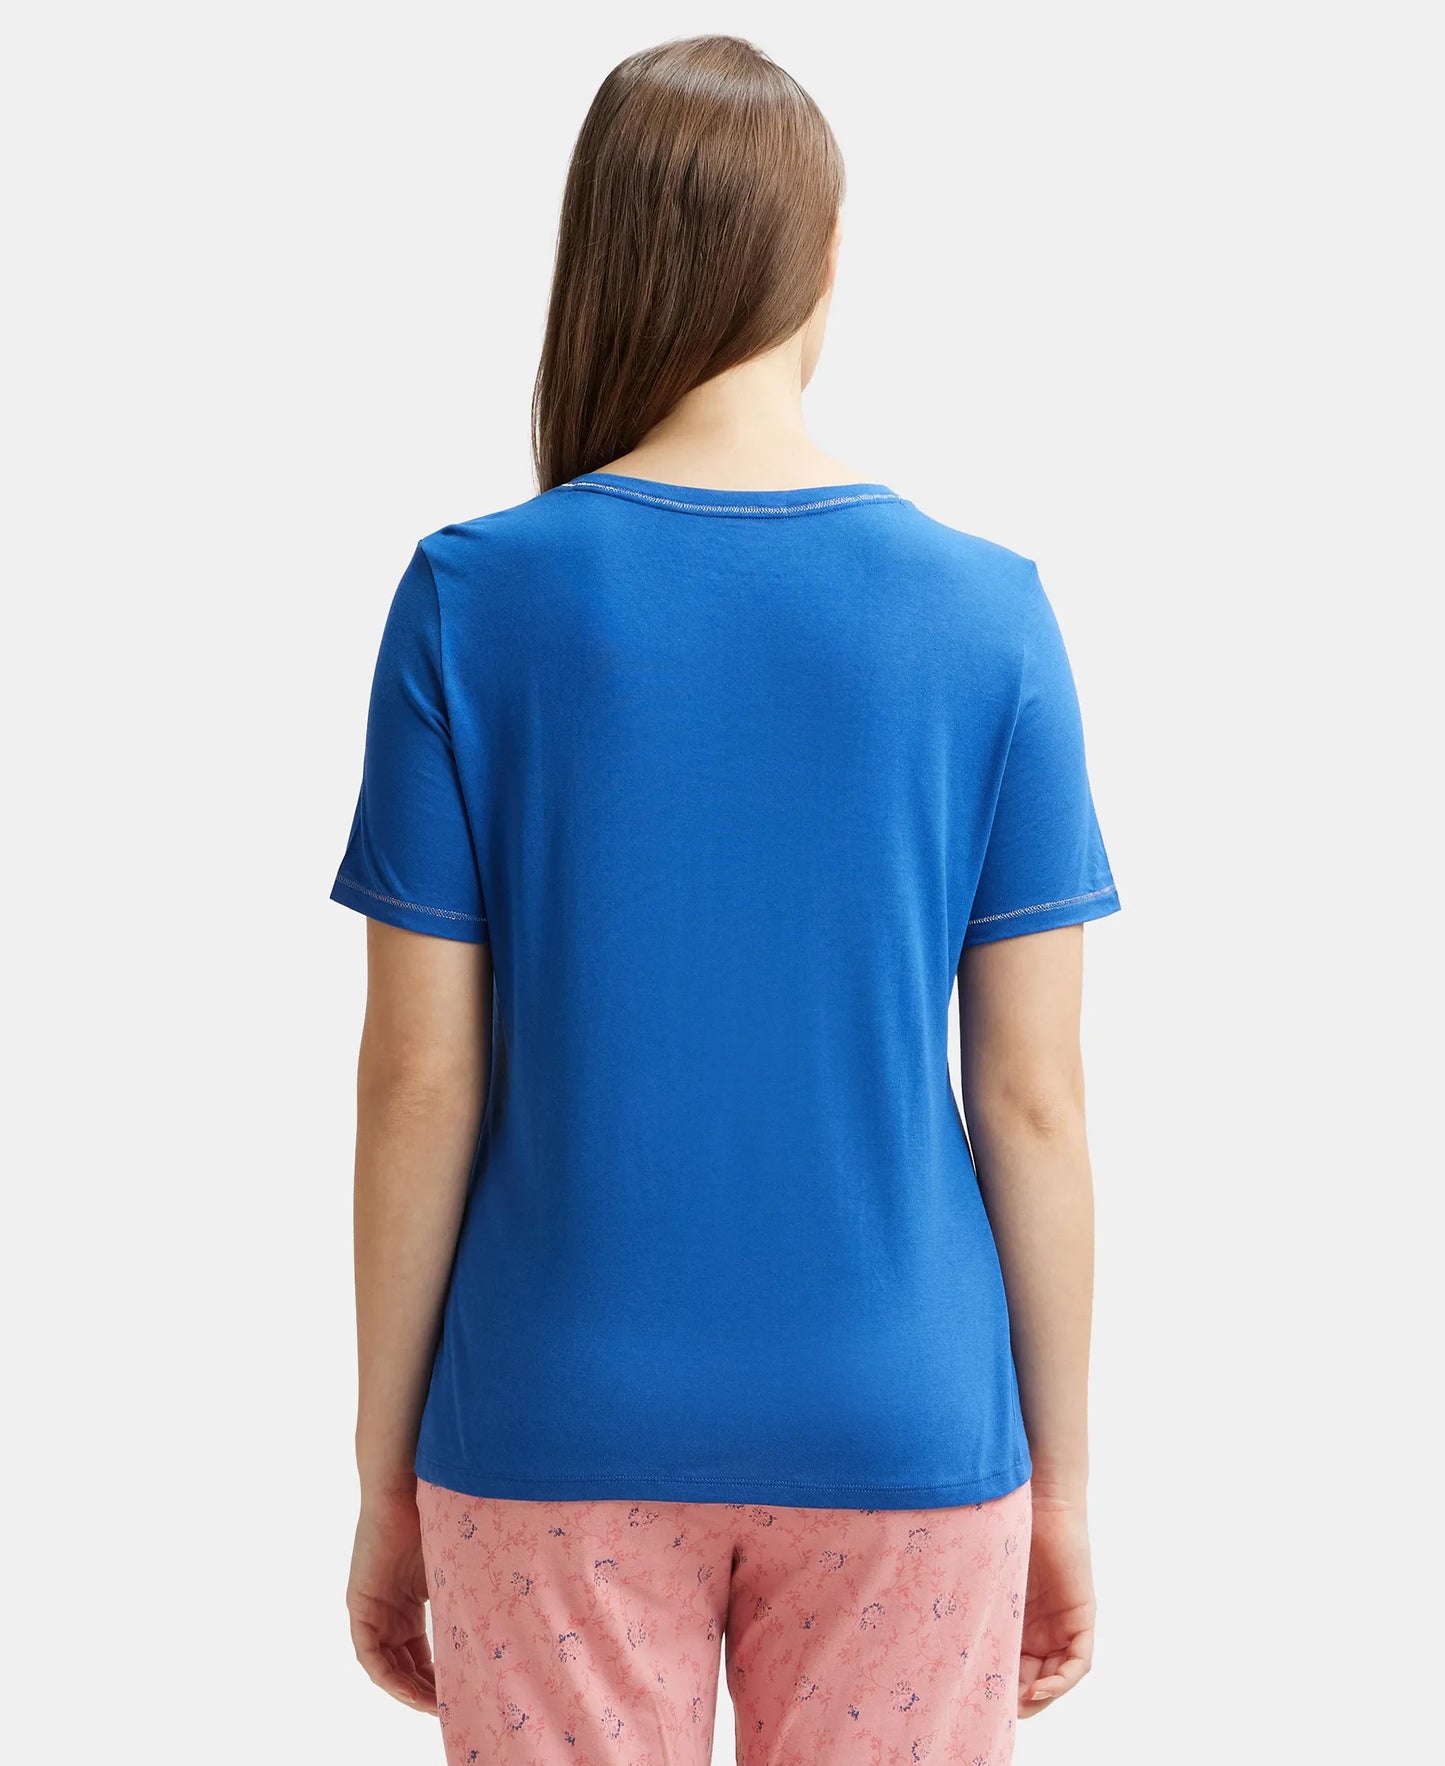 Micro Modal Cotton Relaxed Fit Round neck Half Sleeve T-Shirt - Blue Quartz-3